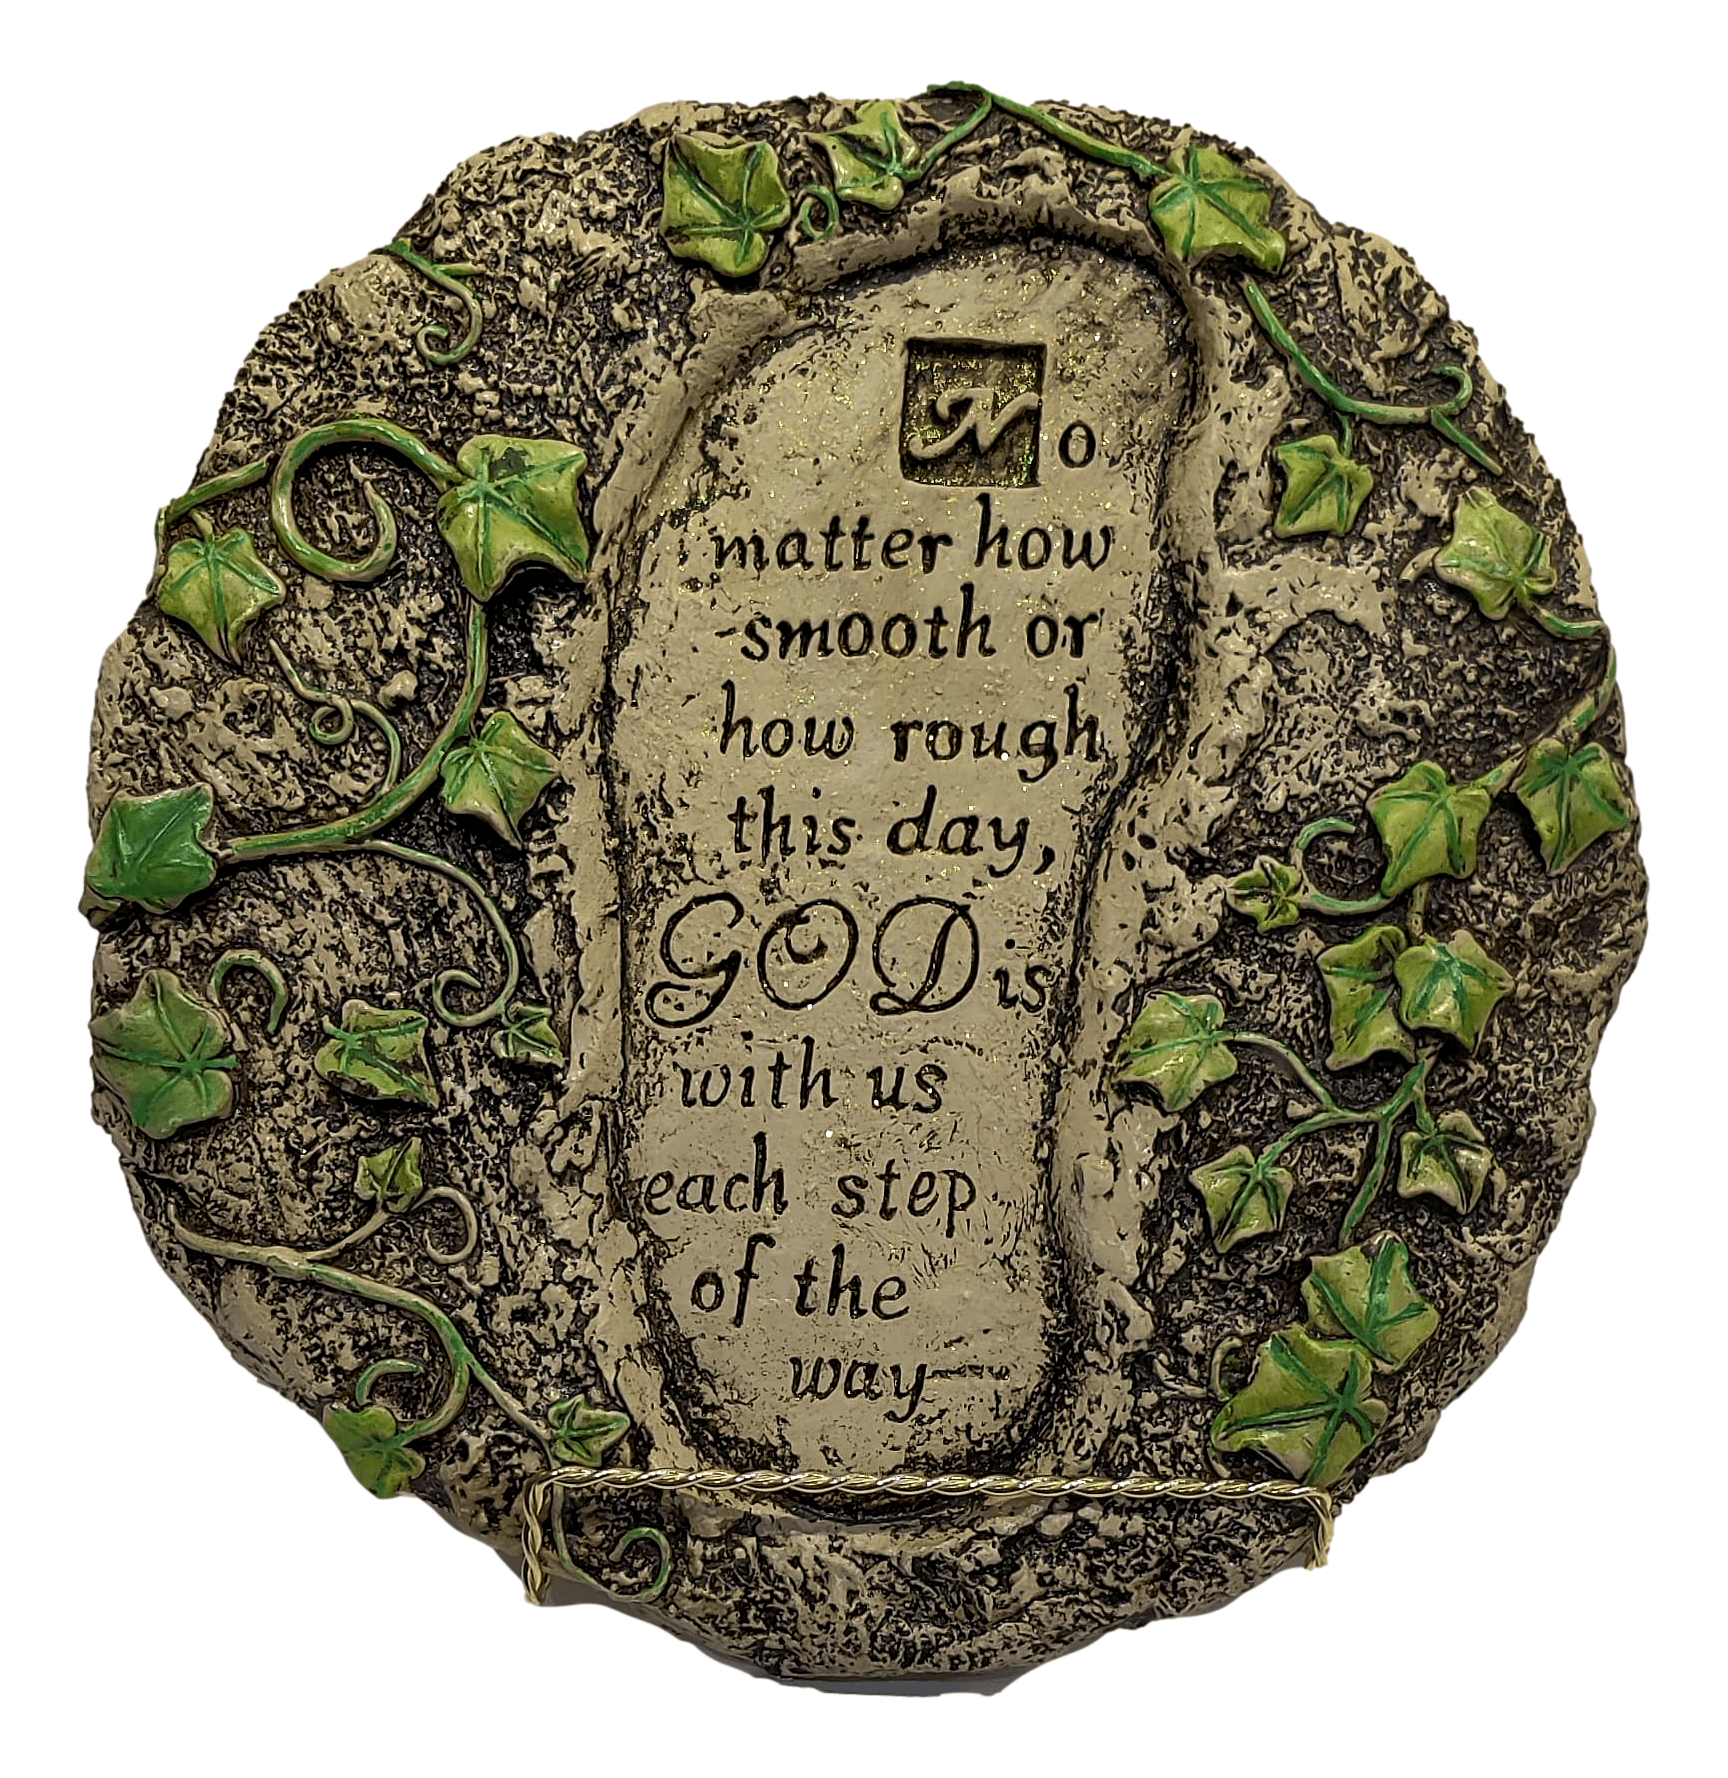 Plaque Footstep in the Ground Ivy Leaves Includes Stand Ceramic Resin 11 inches Circumference - Ysleta Mission Gift Shop- VOTED El Paso's Best Gift Shop